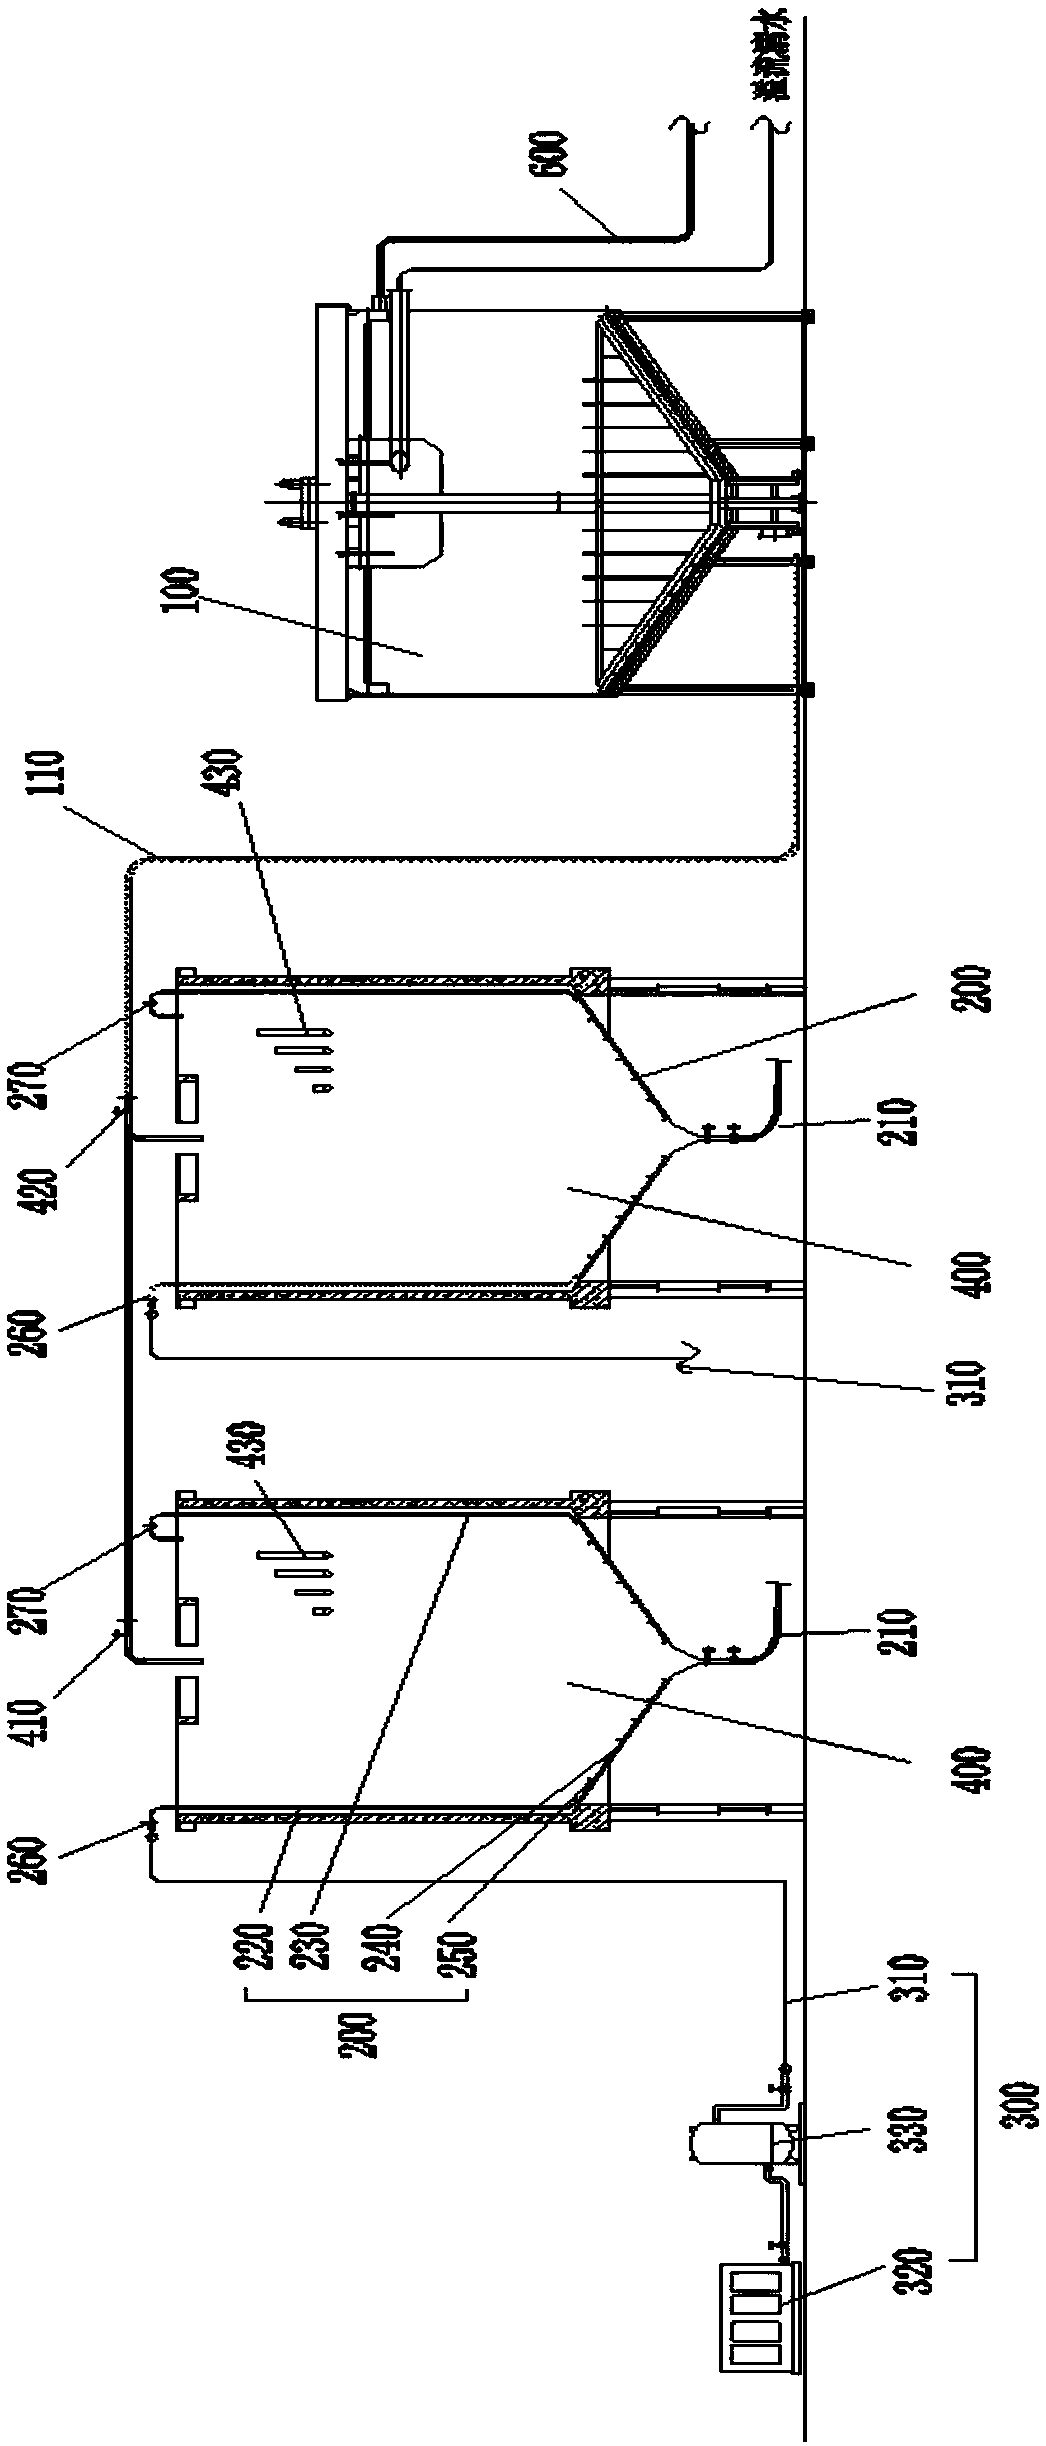 Tailing slurry filling system and technology